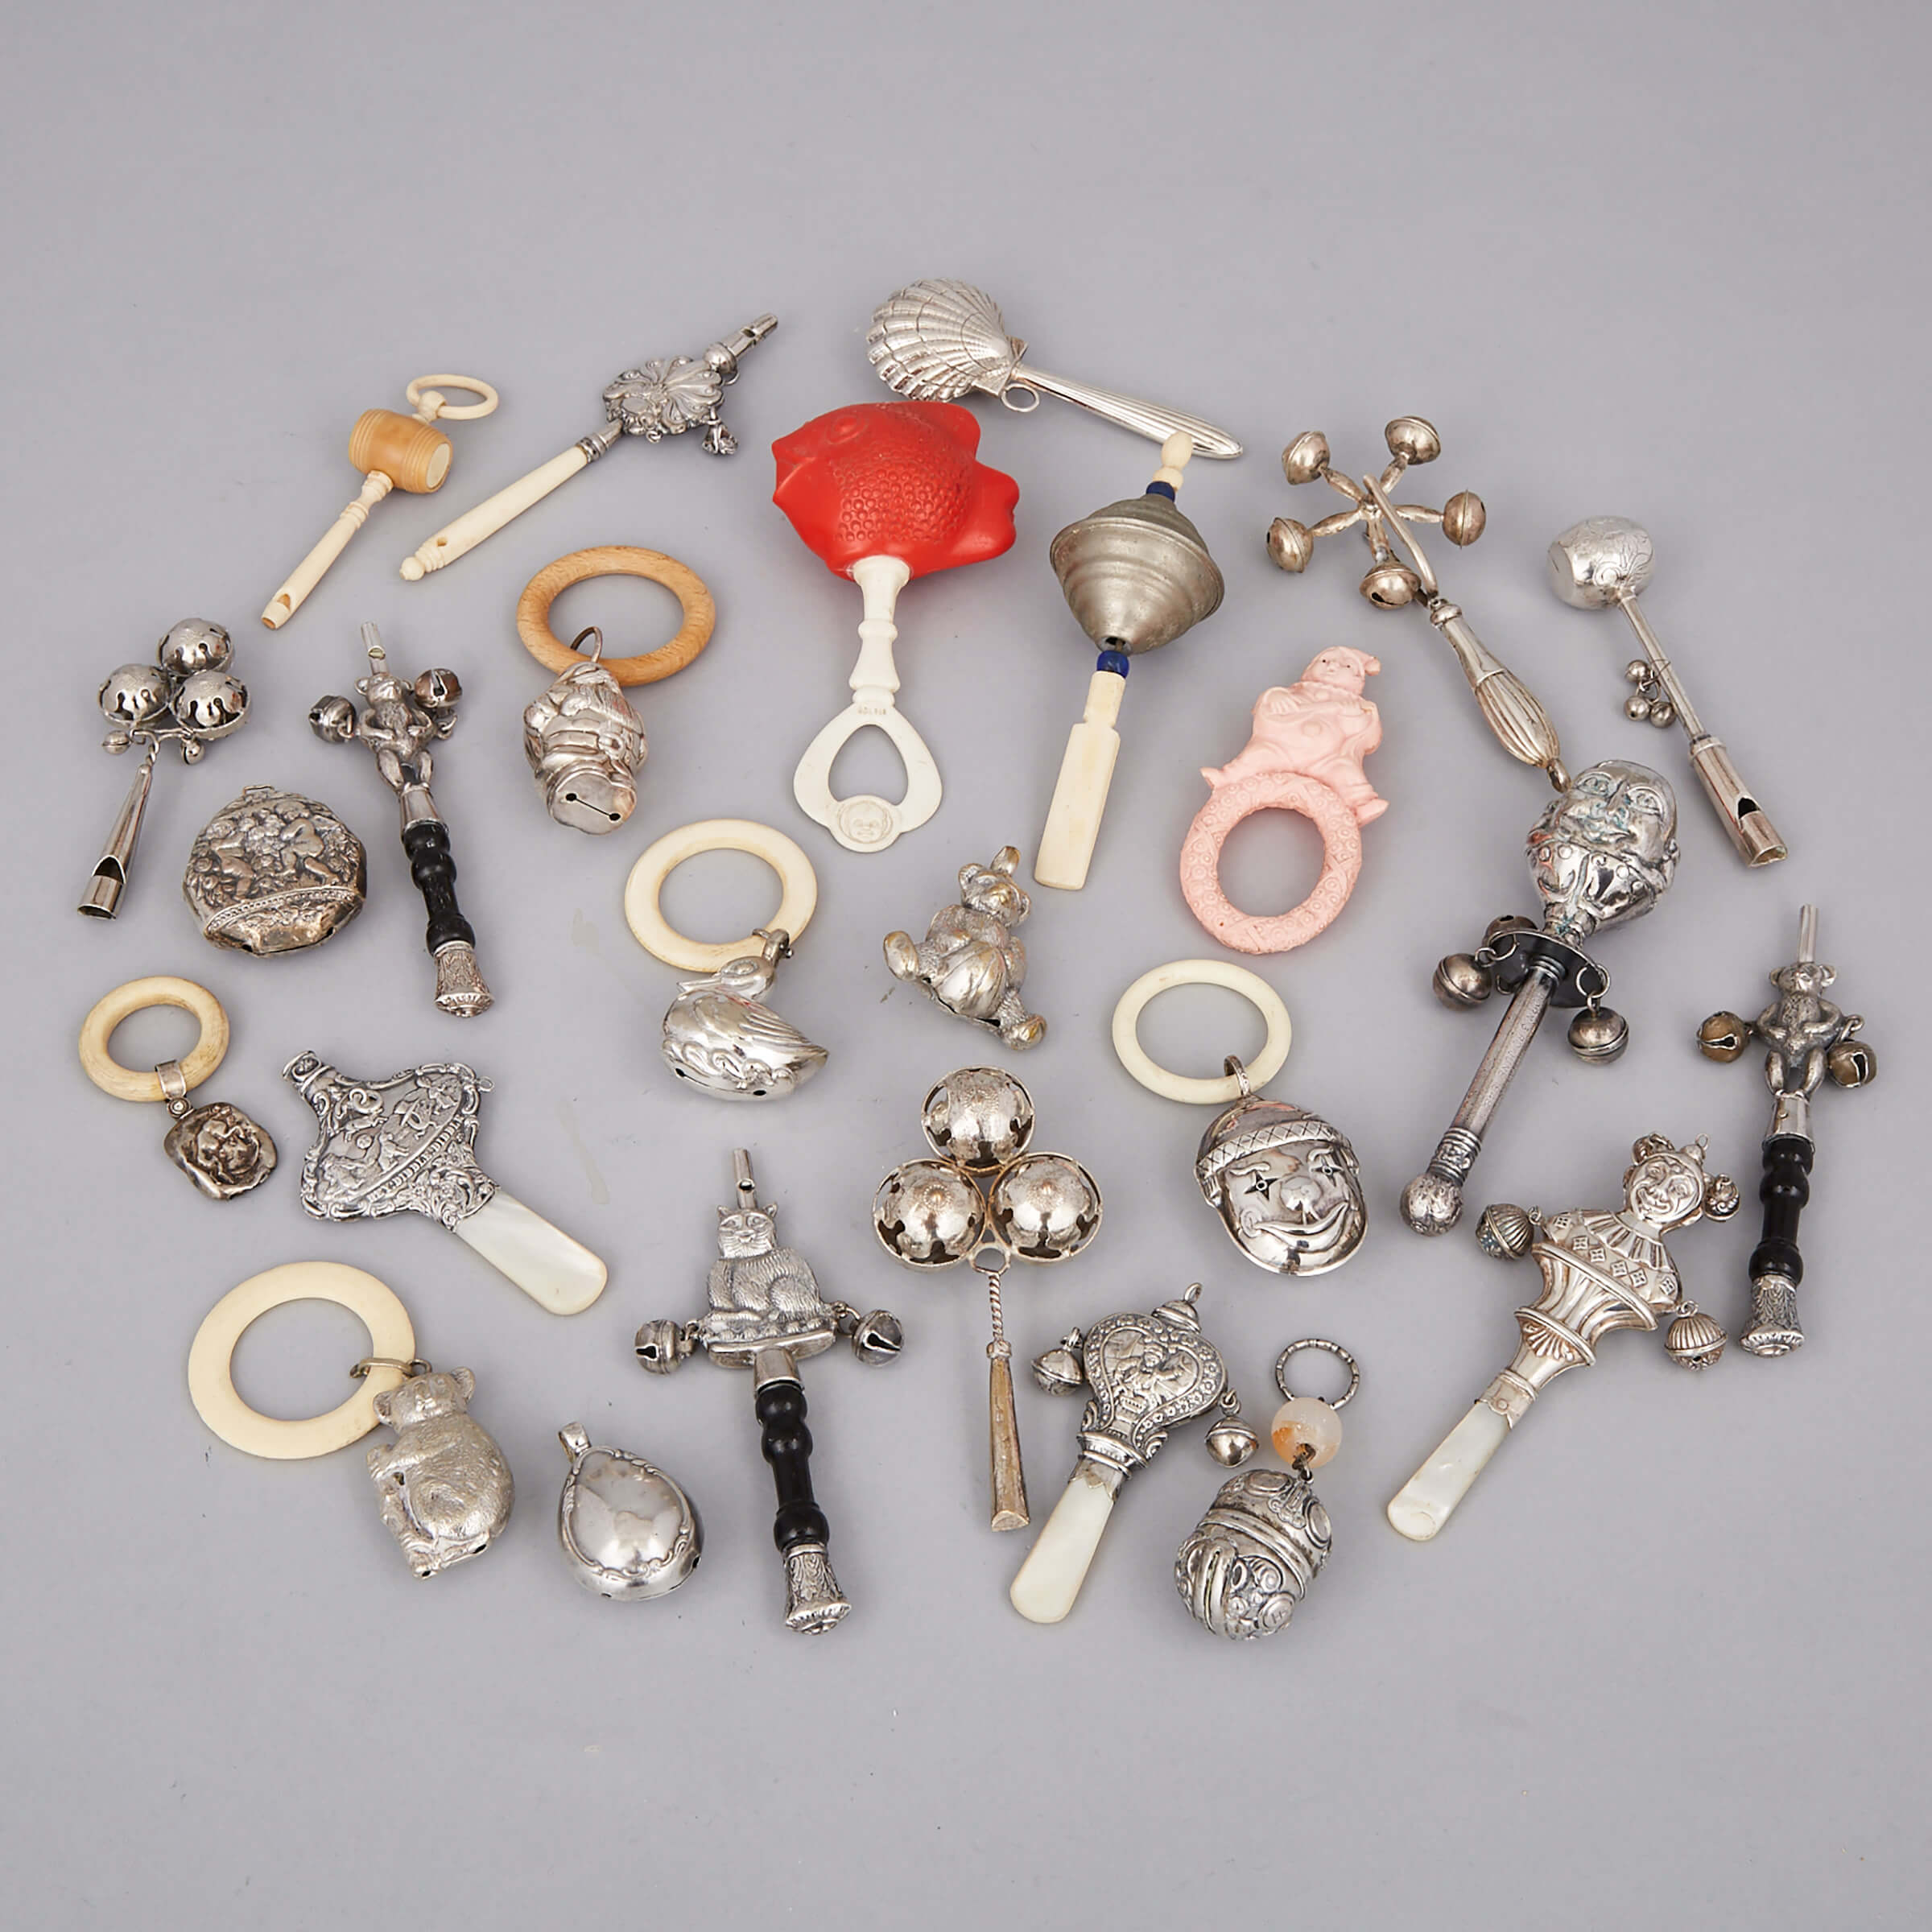 Twenty-Six Various Silver, Silver Plated and Other Child’s Rattles and Whistles, late 19th/20th century